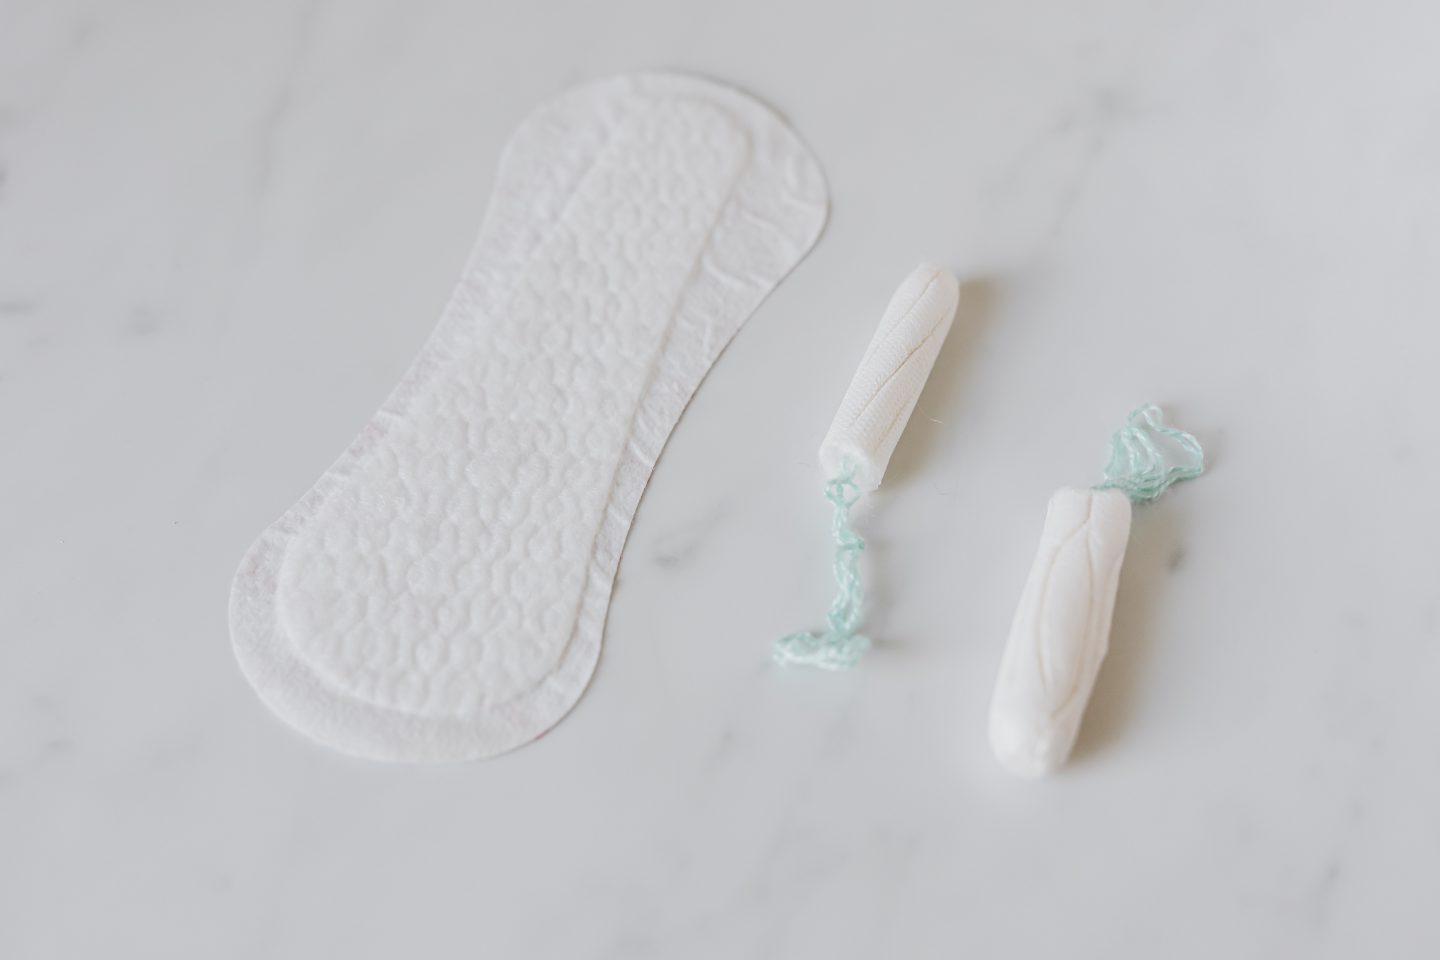 tampons and pant liners